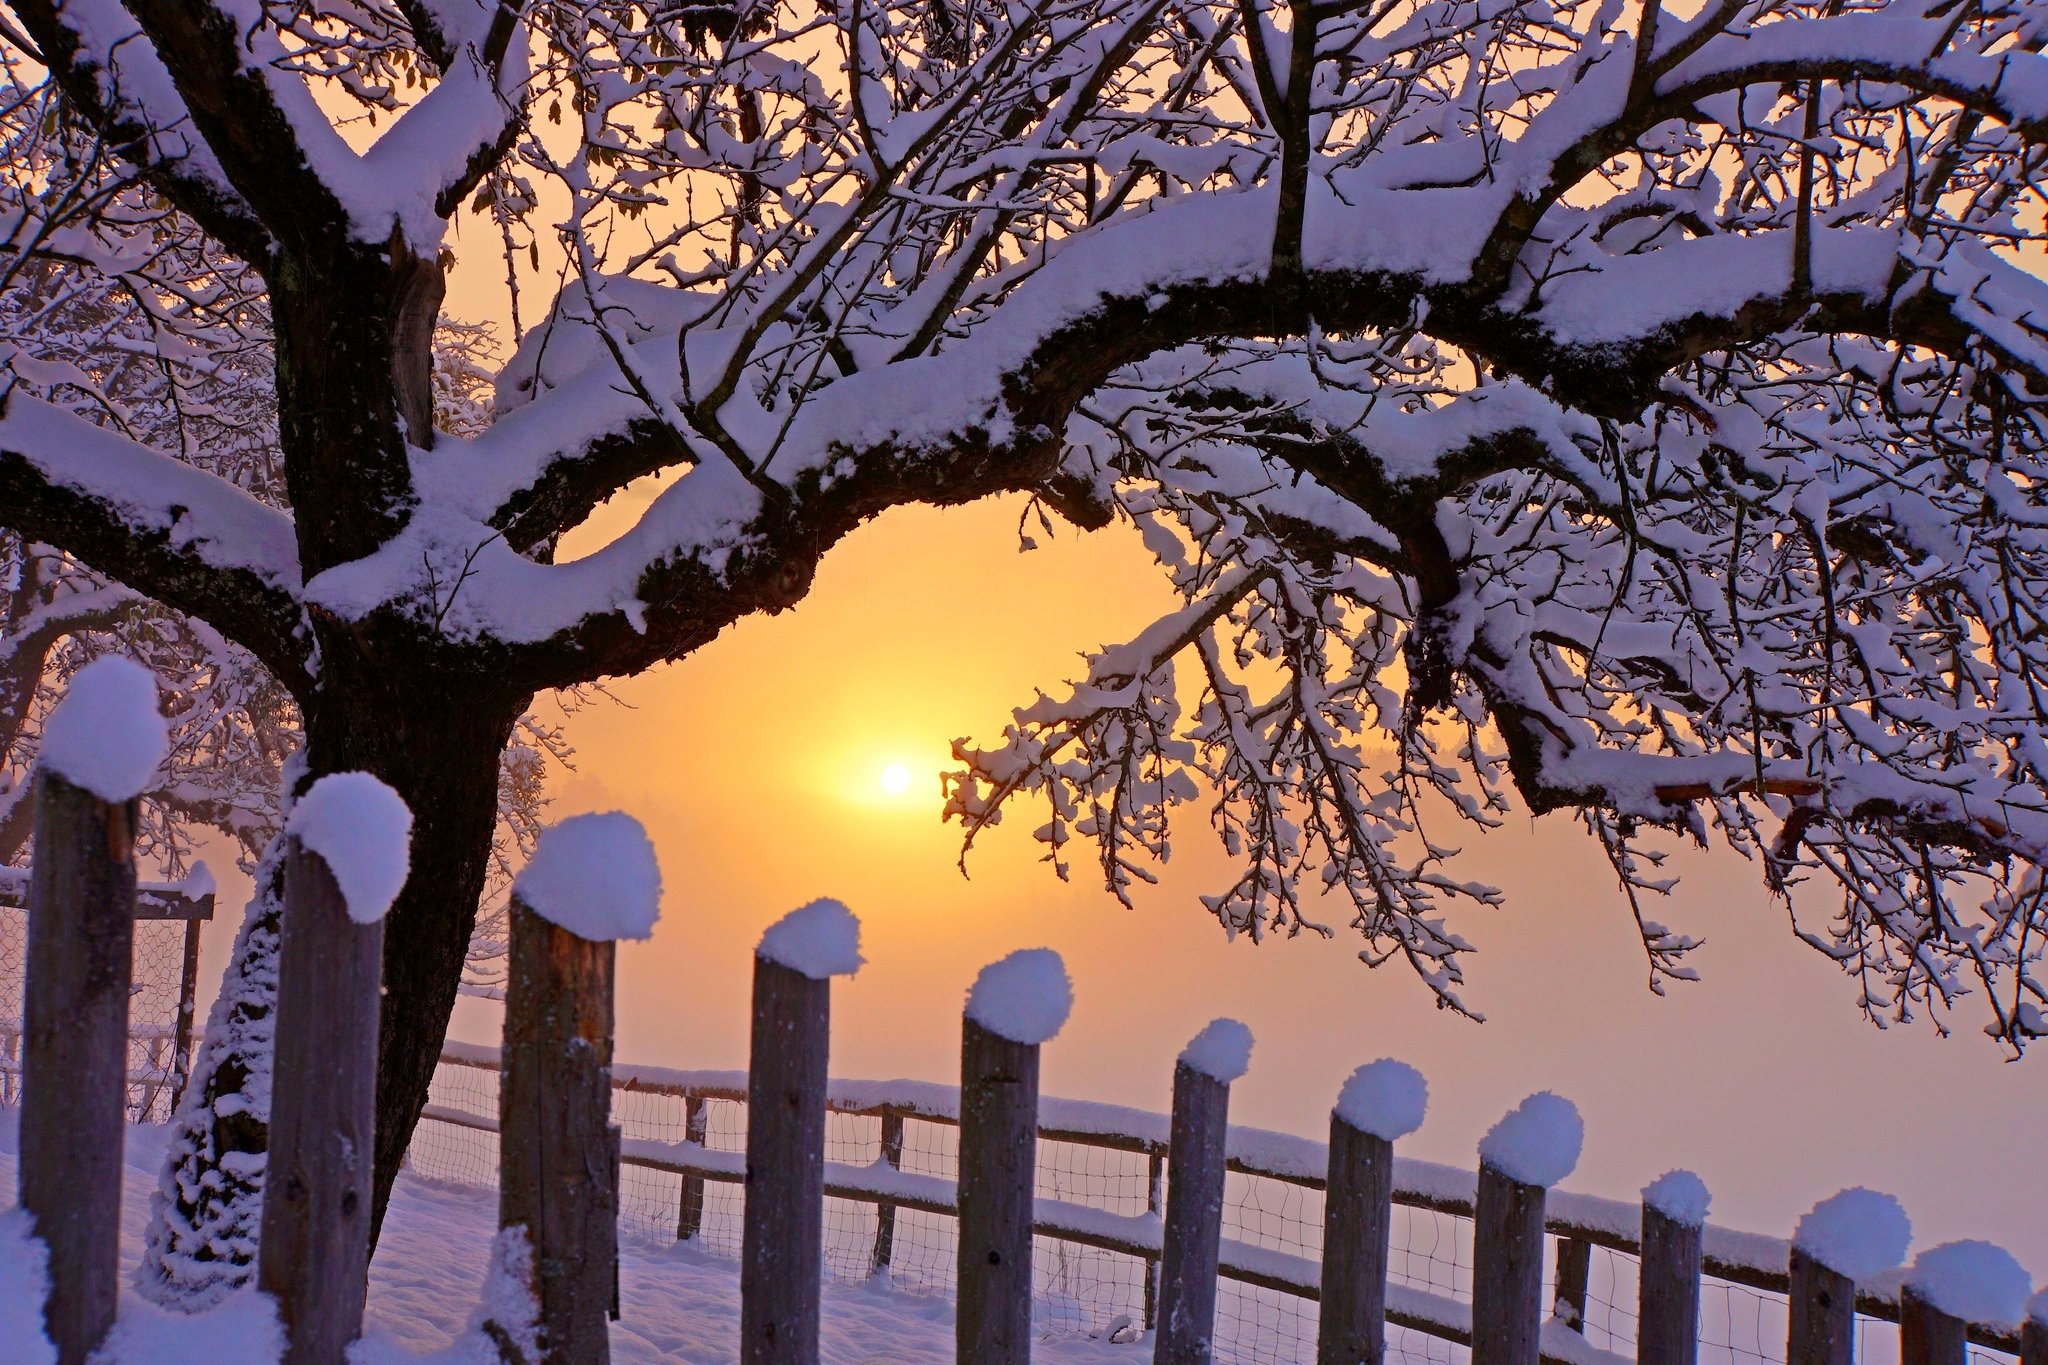 beauty, Christmas, Cover, Dawn, Fence, Ice, Landscape, Nature, Photo, Pure, Snow, Sun, Sunlight, Sunrise, Tree, Trees, Winter, Wooden, Fence Wallpaper